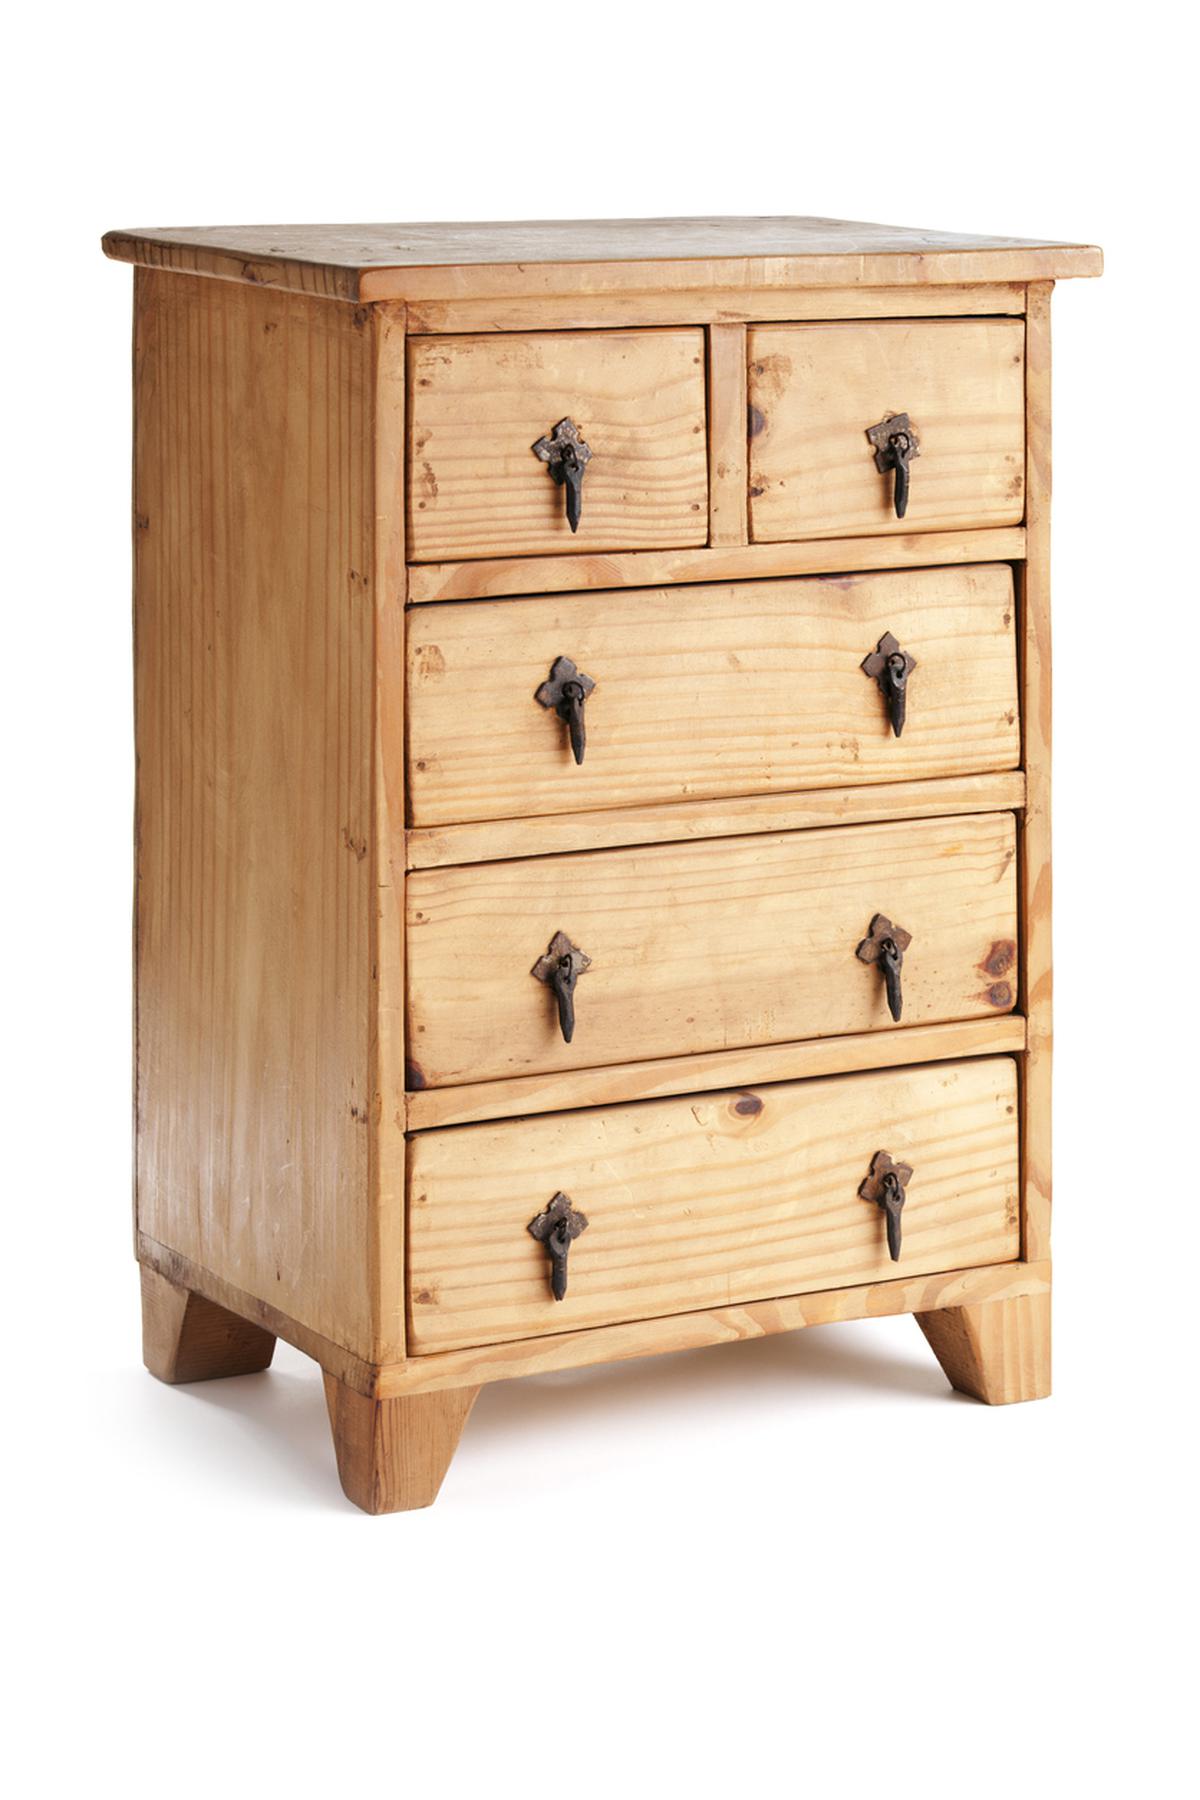 Rustic small wooden chest of drawers cabinet built in the classic American Southwest furniture style from natural pine wood. The basic piece has a plain and simple design, with handles crudely formed of wrought iron metal. Vertical format, cut out and isolated on white background with no people.